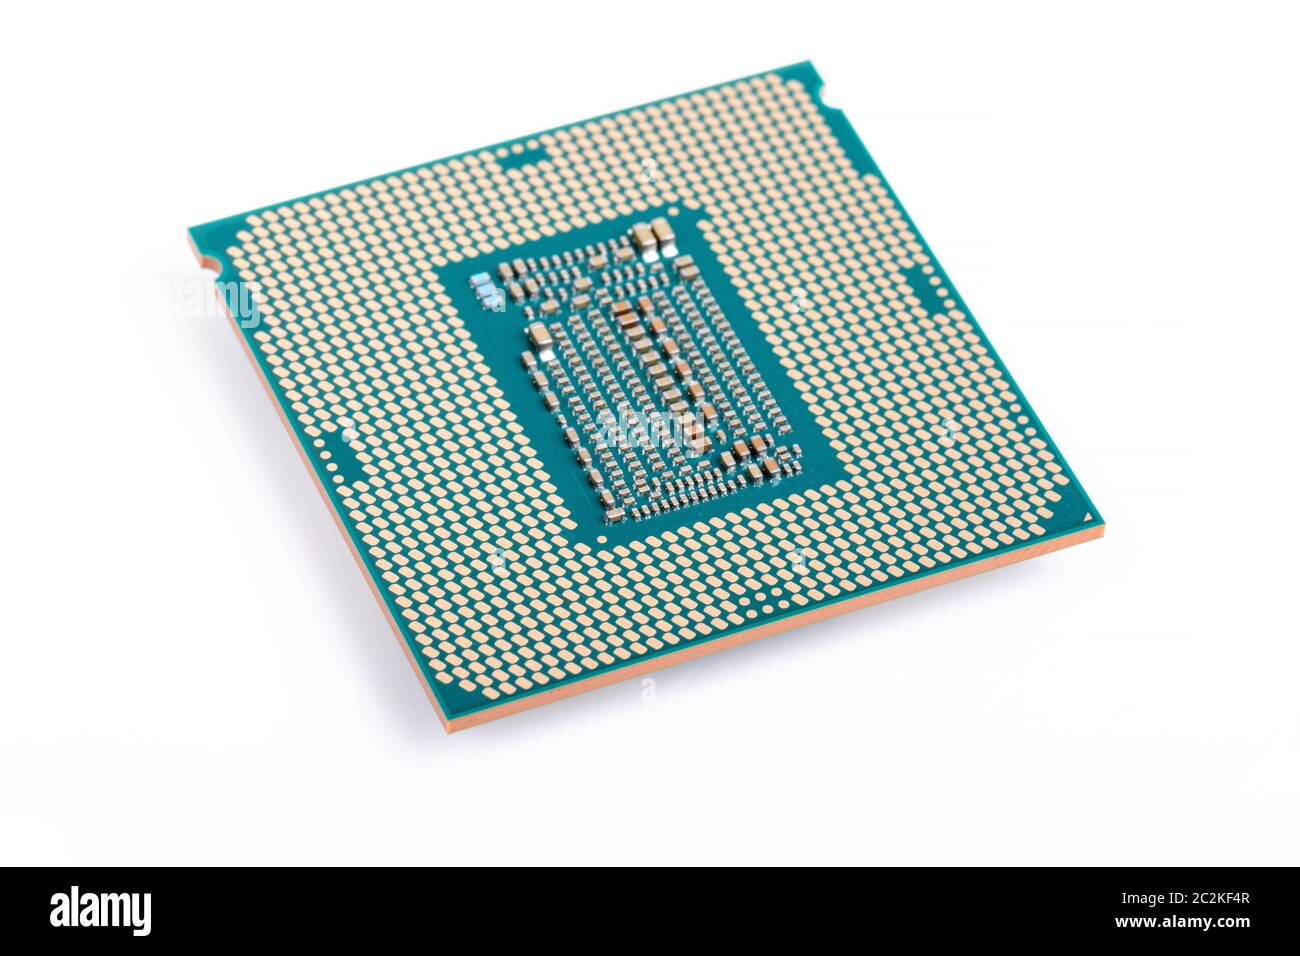 new modern computer x86 processor 9th generation, central processing unit  CPU, isolated on white background Stock Photo - Alamy